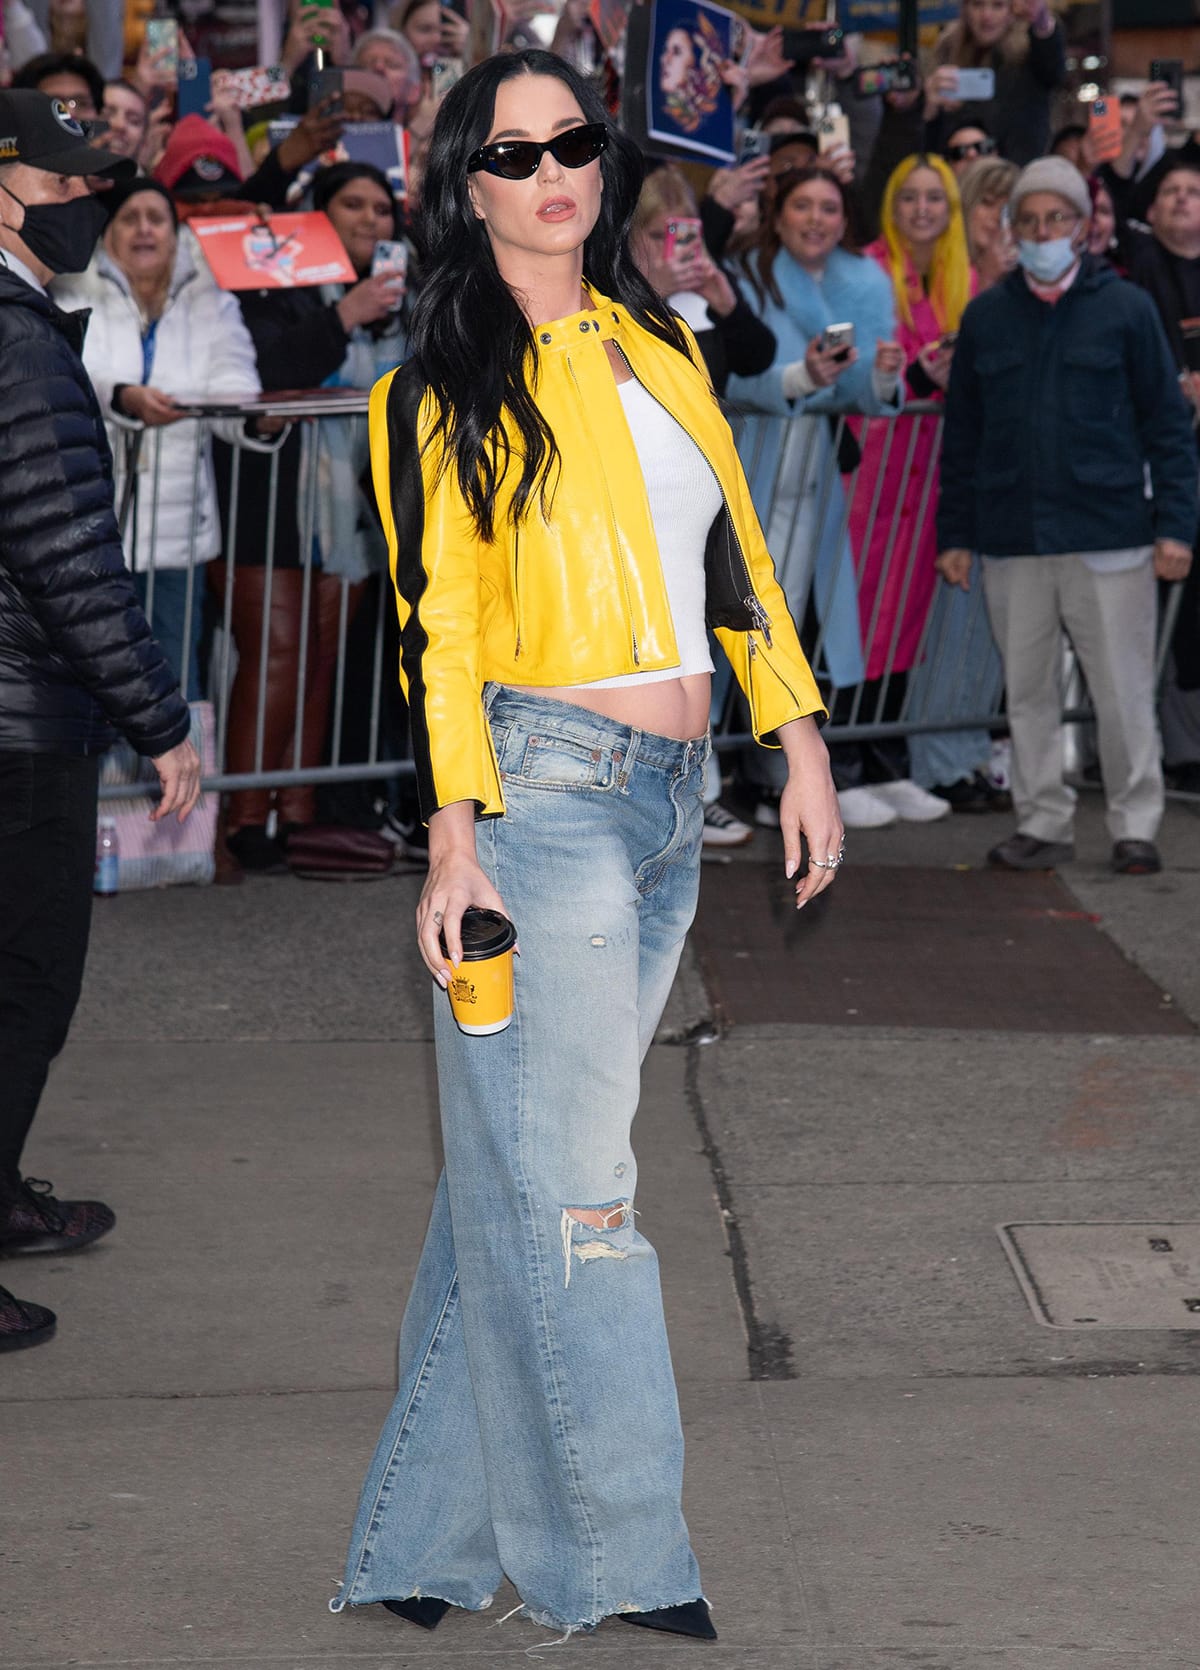 Katy Perry pairs her bright yellow moto jacket with a white ribbed crop top and a pair of R13 distressed baggy jeans